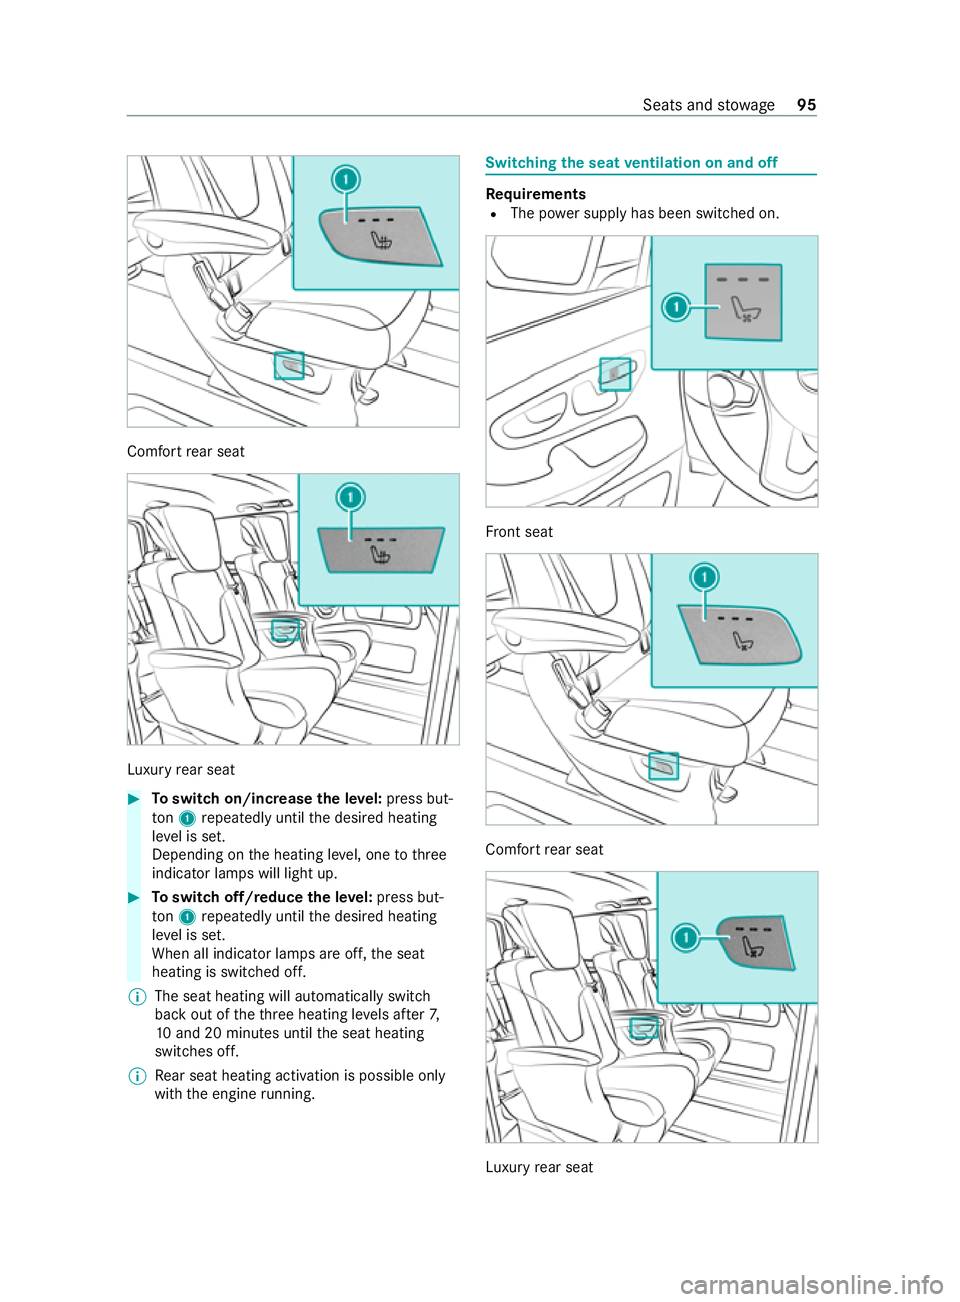 MERCEDES-BENZ V-CLASS MPV 2021  Owners Manual Comfort
rear seat Lu
xury rear seat #
Toswitch on/increase the le vel:press but‐
to n1 repeatedly until the desired heating
le ve l is set.
Depending on the heating le vel, one tothree
indicator lam